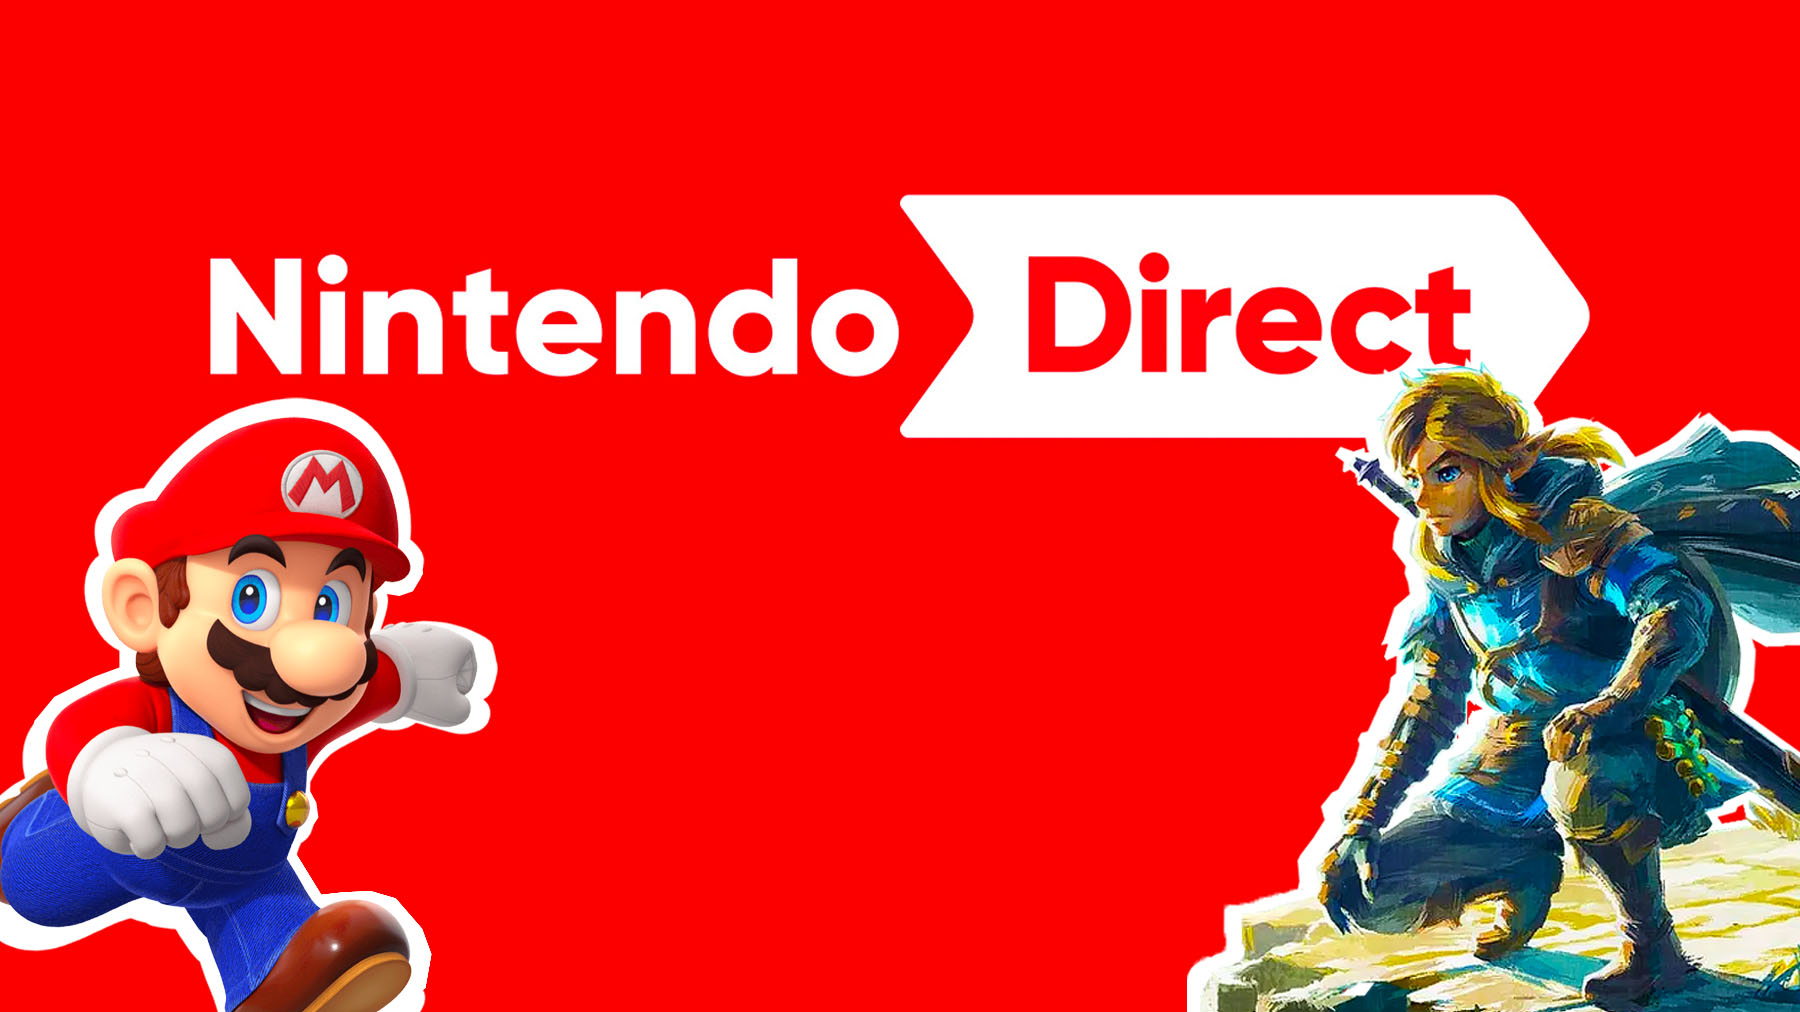 Nintendo Direct Live Blog: the biggest Switch news as it happens